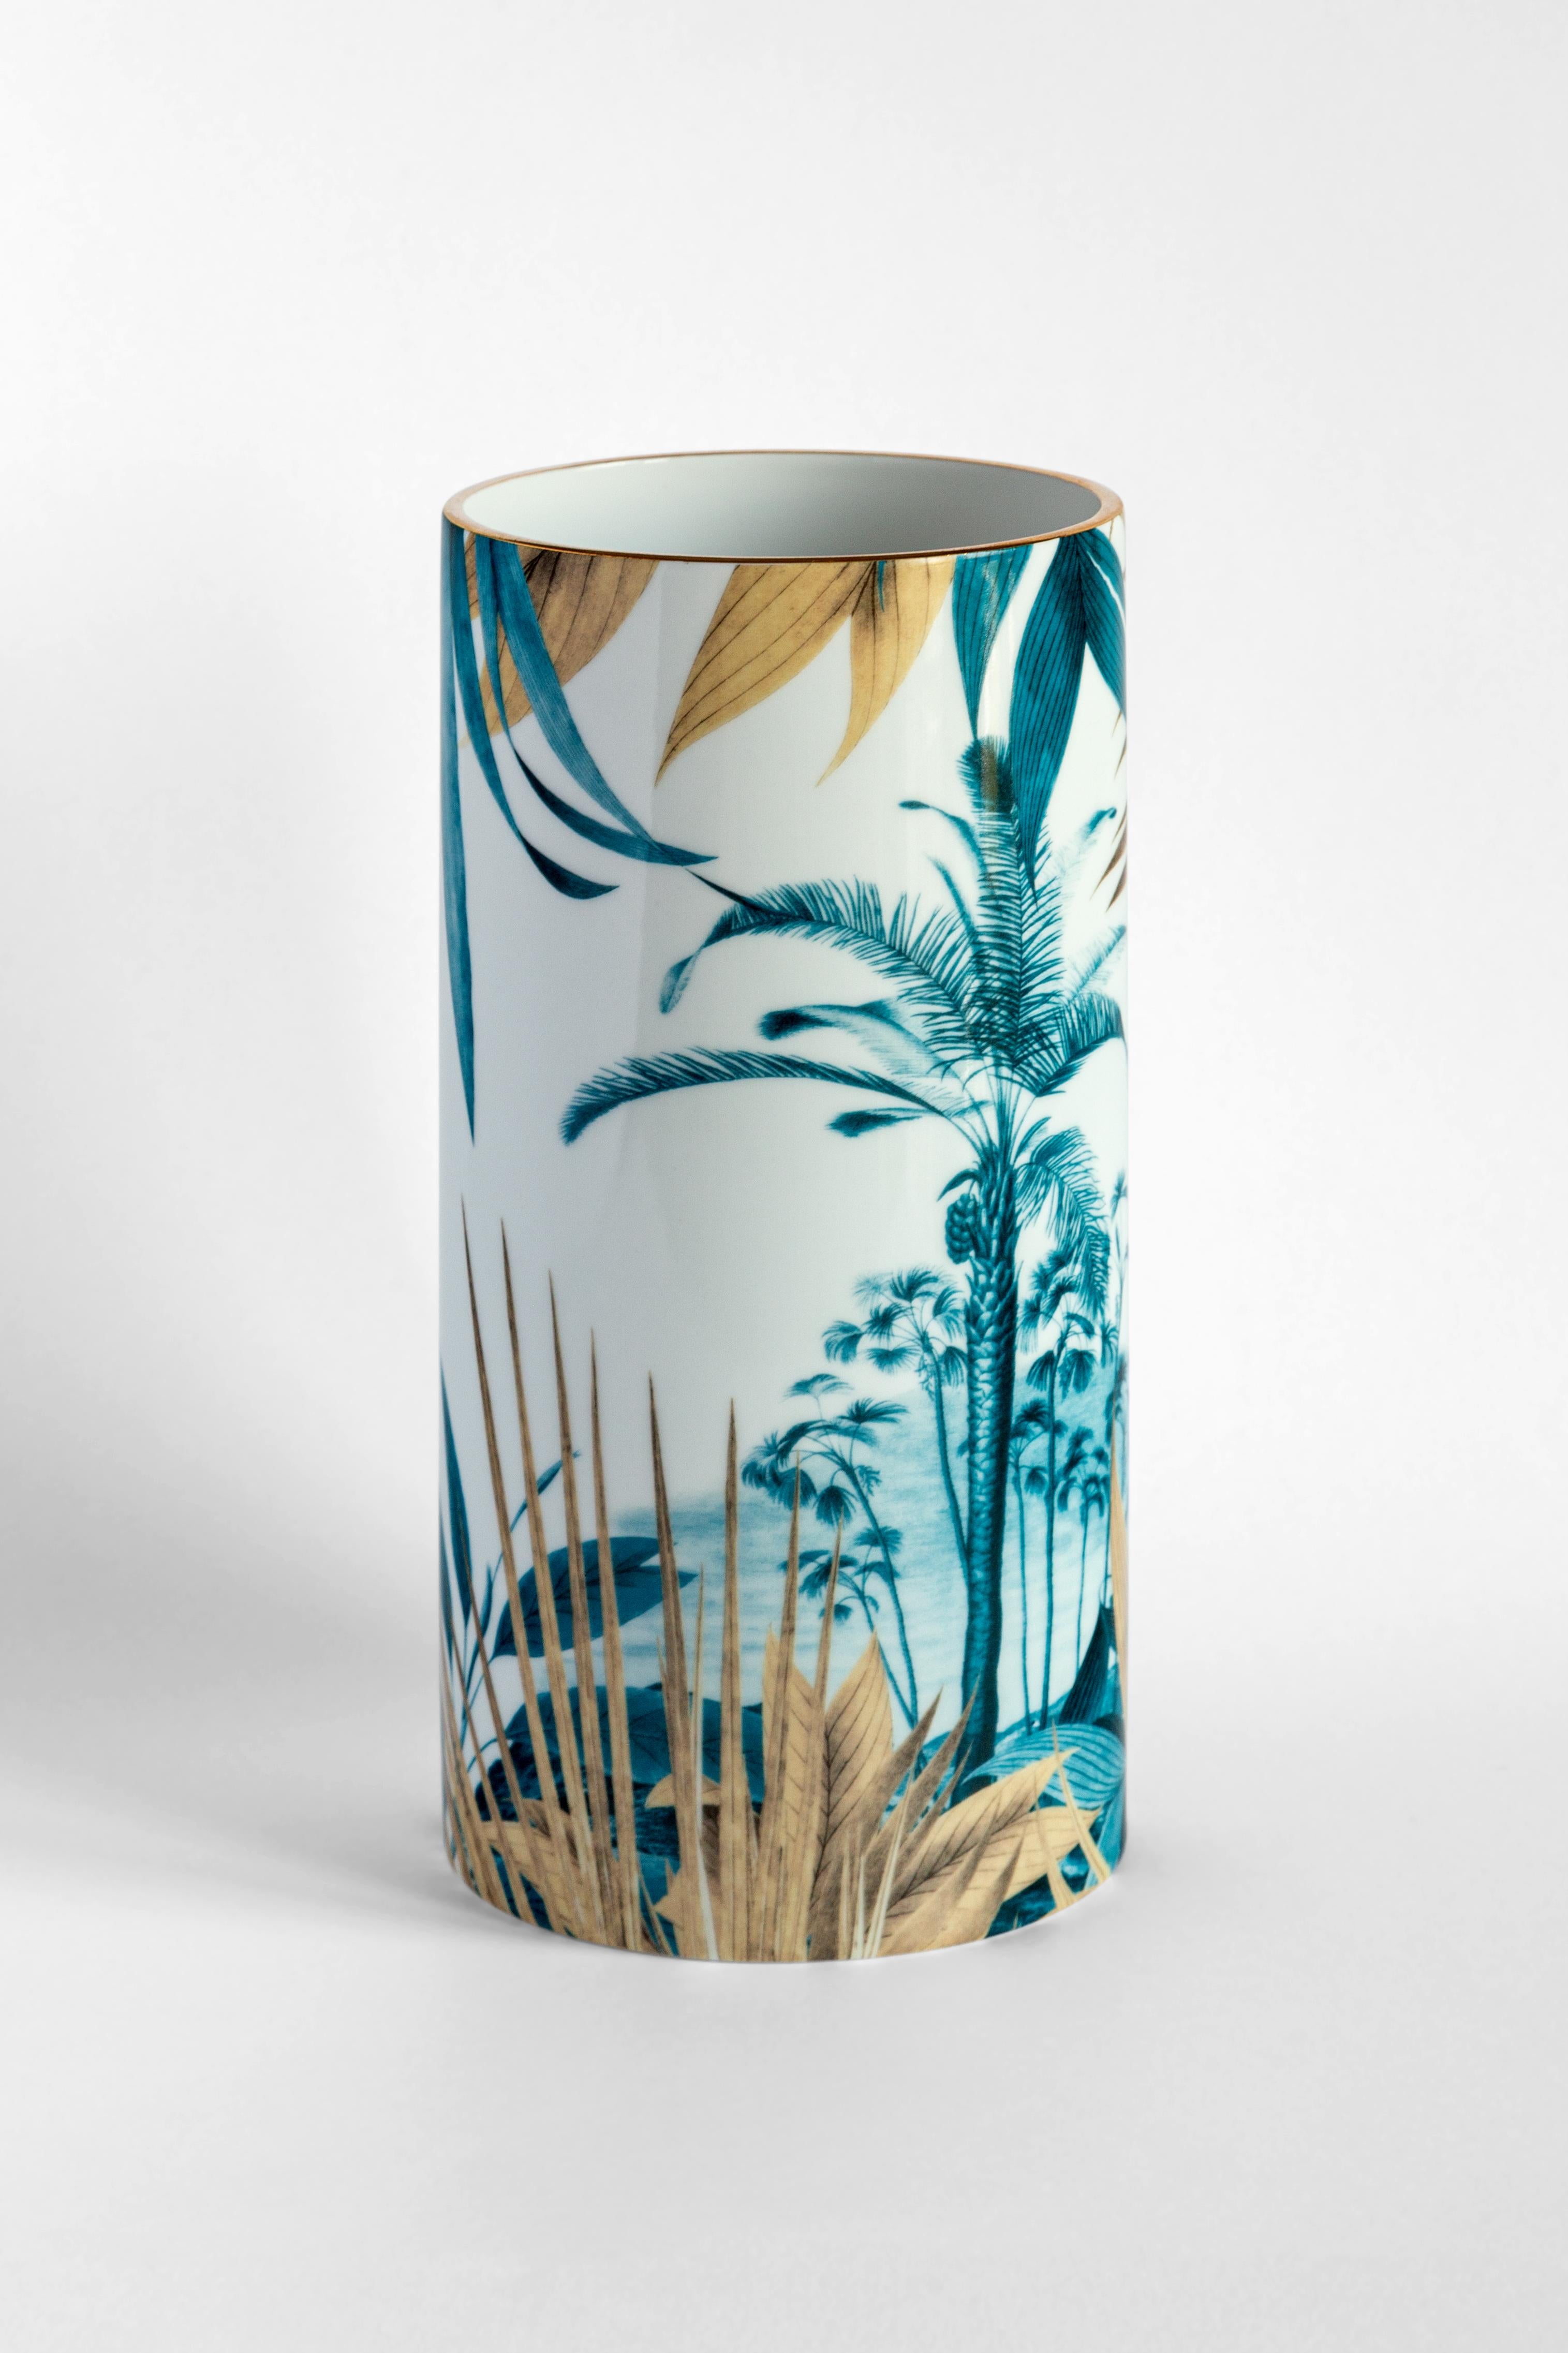 Vito Nesta's Las Palmas Collection of porcelains is inspired by his extensive travels around the world. The prominence and use of a paradisiacal and tranquil motif create a welcoming ambiance in a modern interior. On this vase, a beautiful palm tree